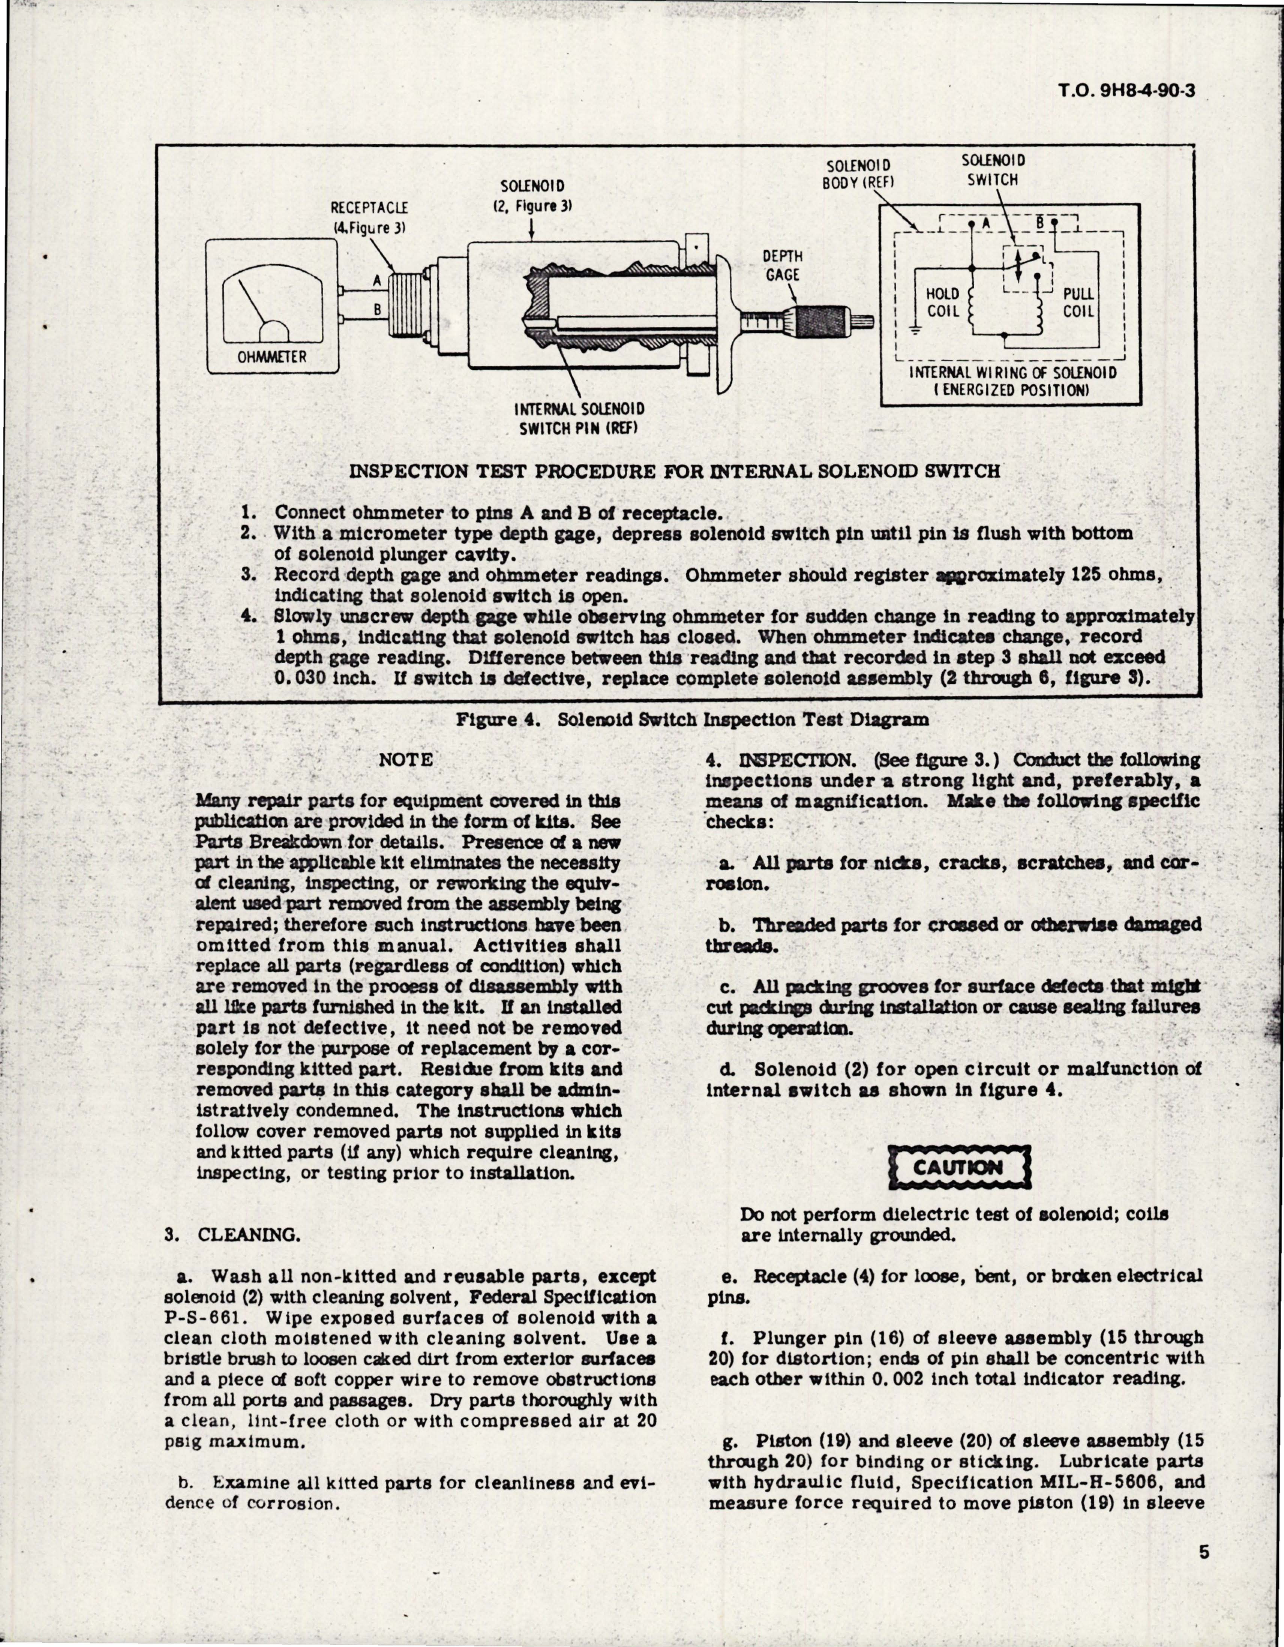 Sample page 5 from AirCorps Library document: Overhaul Instructions w Parts Breakdown for 3000 PSI Solenoid Operated Valve - Part 38-013 